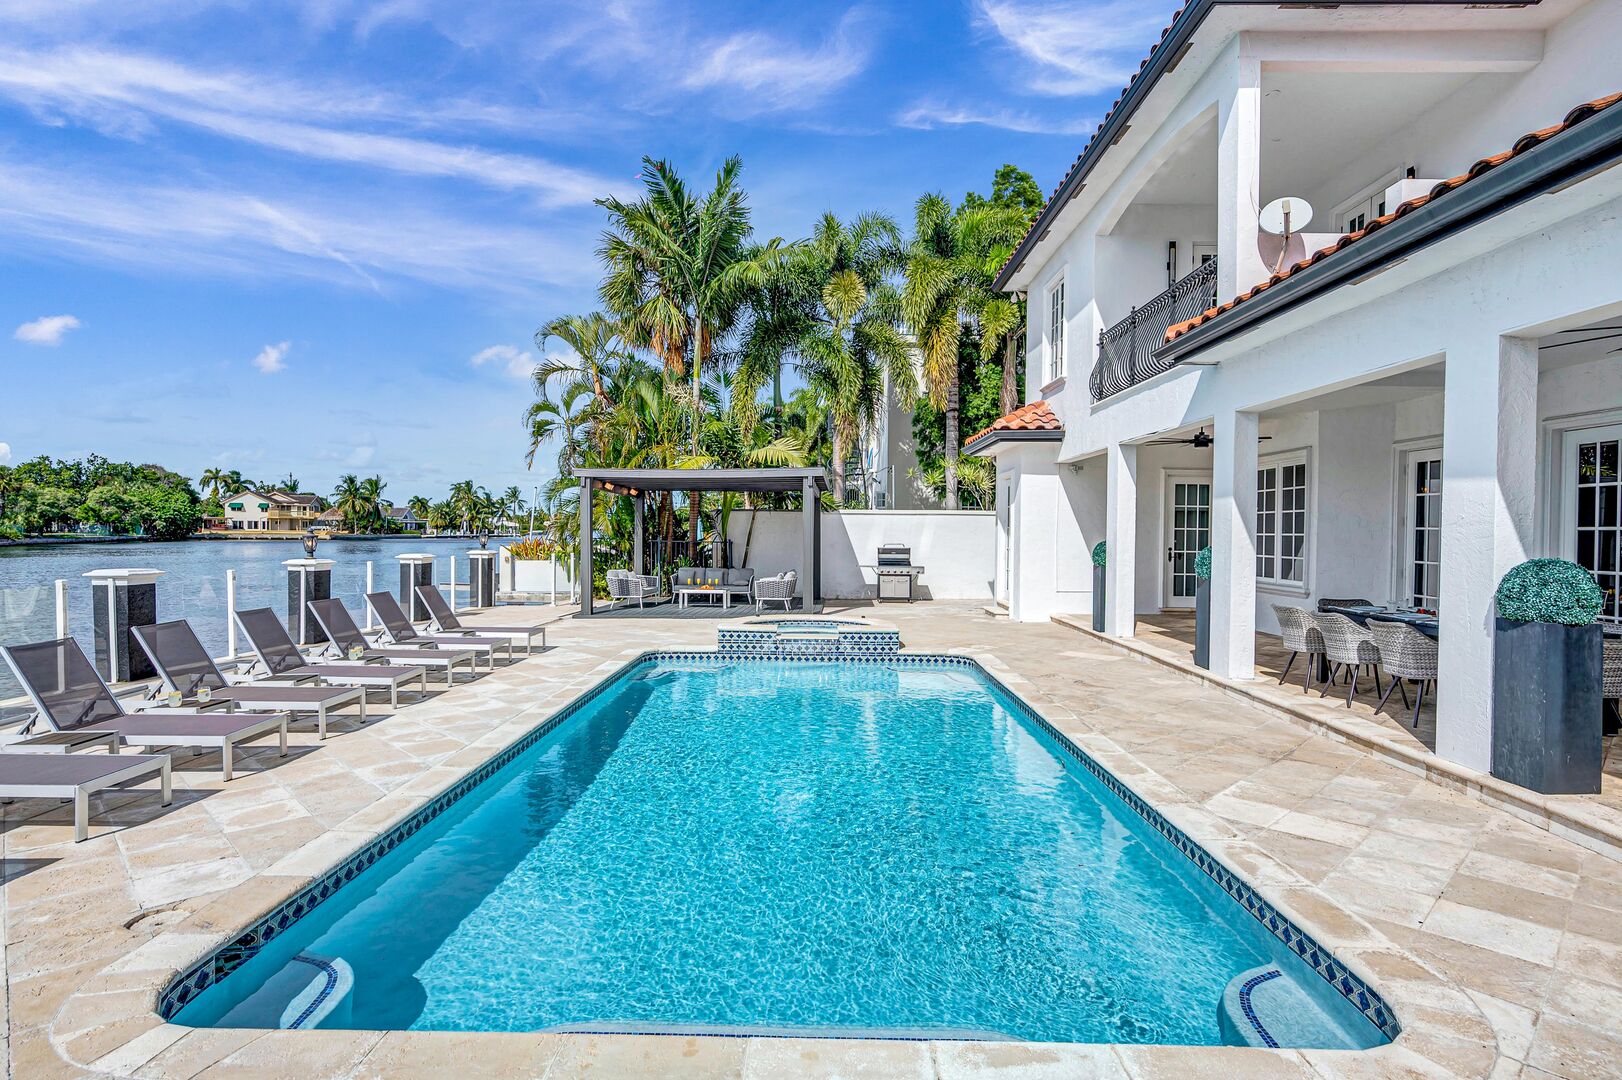 Relish in waterfront tranquility from the heated pool and lounge areas.